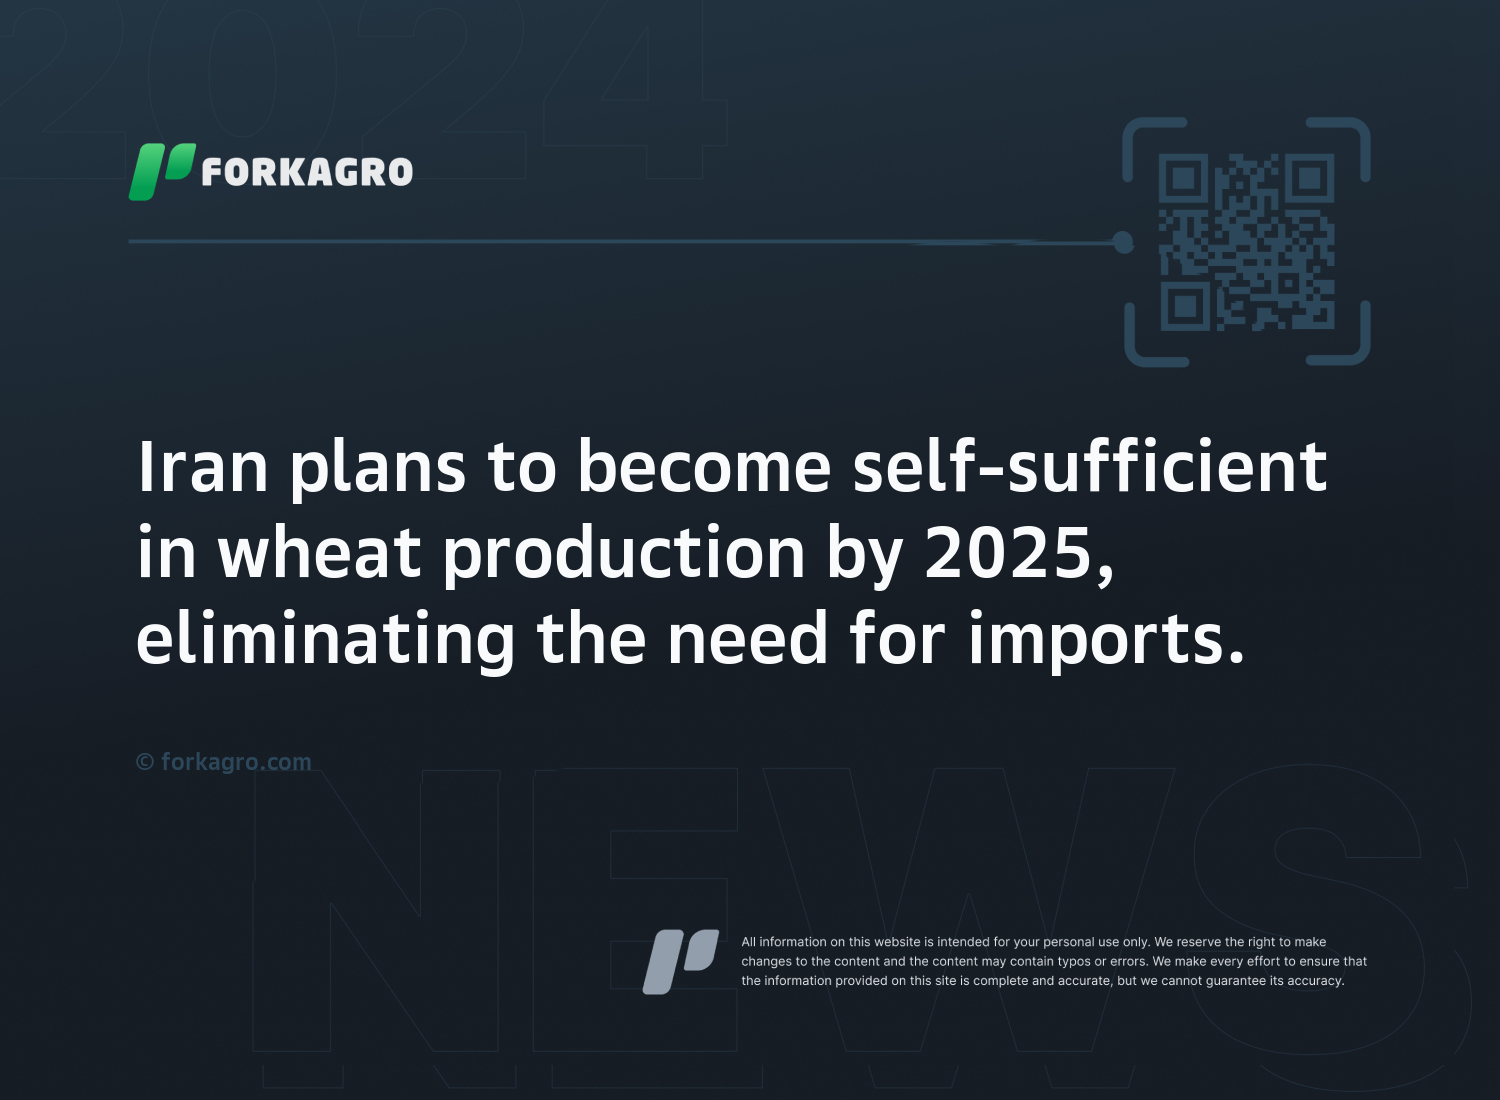 Iran plans to become self-sufficient in wheat production by 2025, eliminating the need for imports.